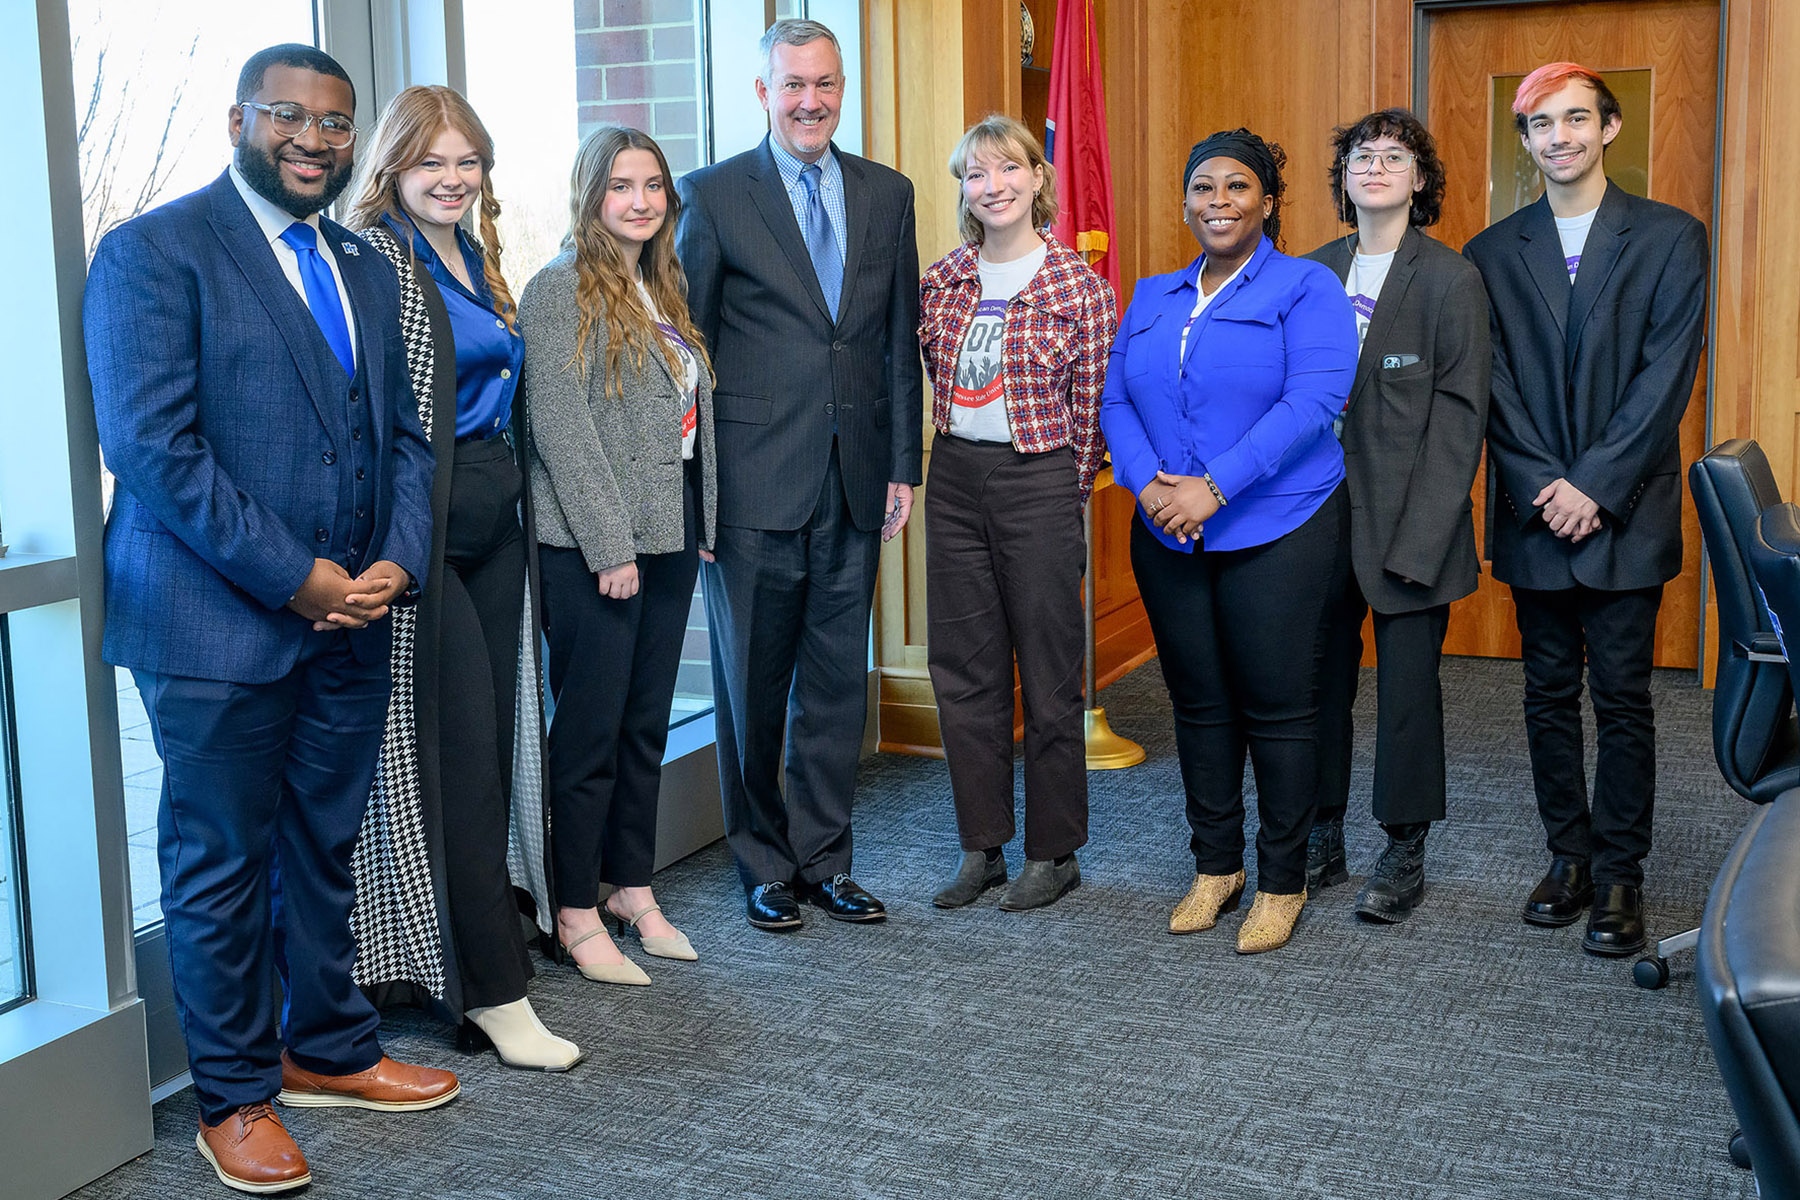 Secretary of State Tre Hargett visited the Middle Tennessee State University campus Nov. 28, 2023, for a luncheon where he presented the Student Government Association and MTSU chapter of the American Democracy Project members with the Tennessee College Voter Registration Award in the four-year public school category. Pictured, from left, are Michai Mosby, SGA president; Caroline Spann, SGA election commissioner; Victoria Grigsby, ADP president; Secretary of State Tre Hargett; Nancy Prescott, ADP graduate research assistant; Kalea Jackson, ADP vice president; Dante Buttrey, ADP treasurer; and Marcus Rosario, ADP member. (MTSU photo by J. Intintoli)